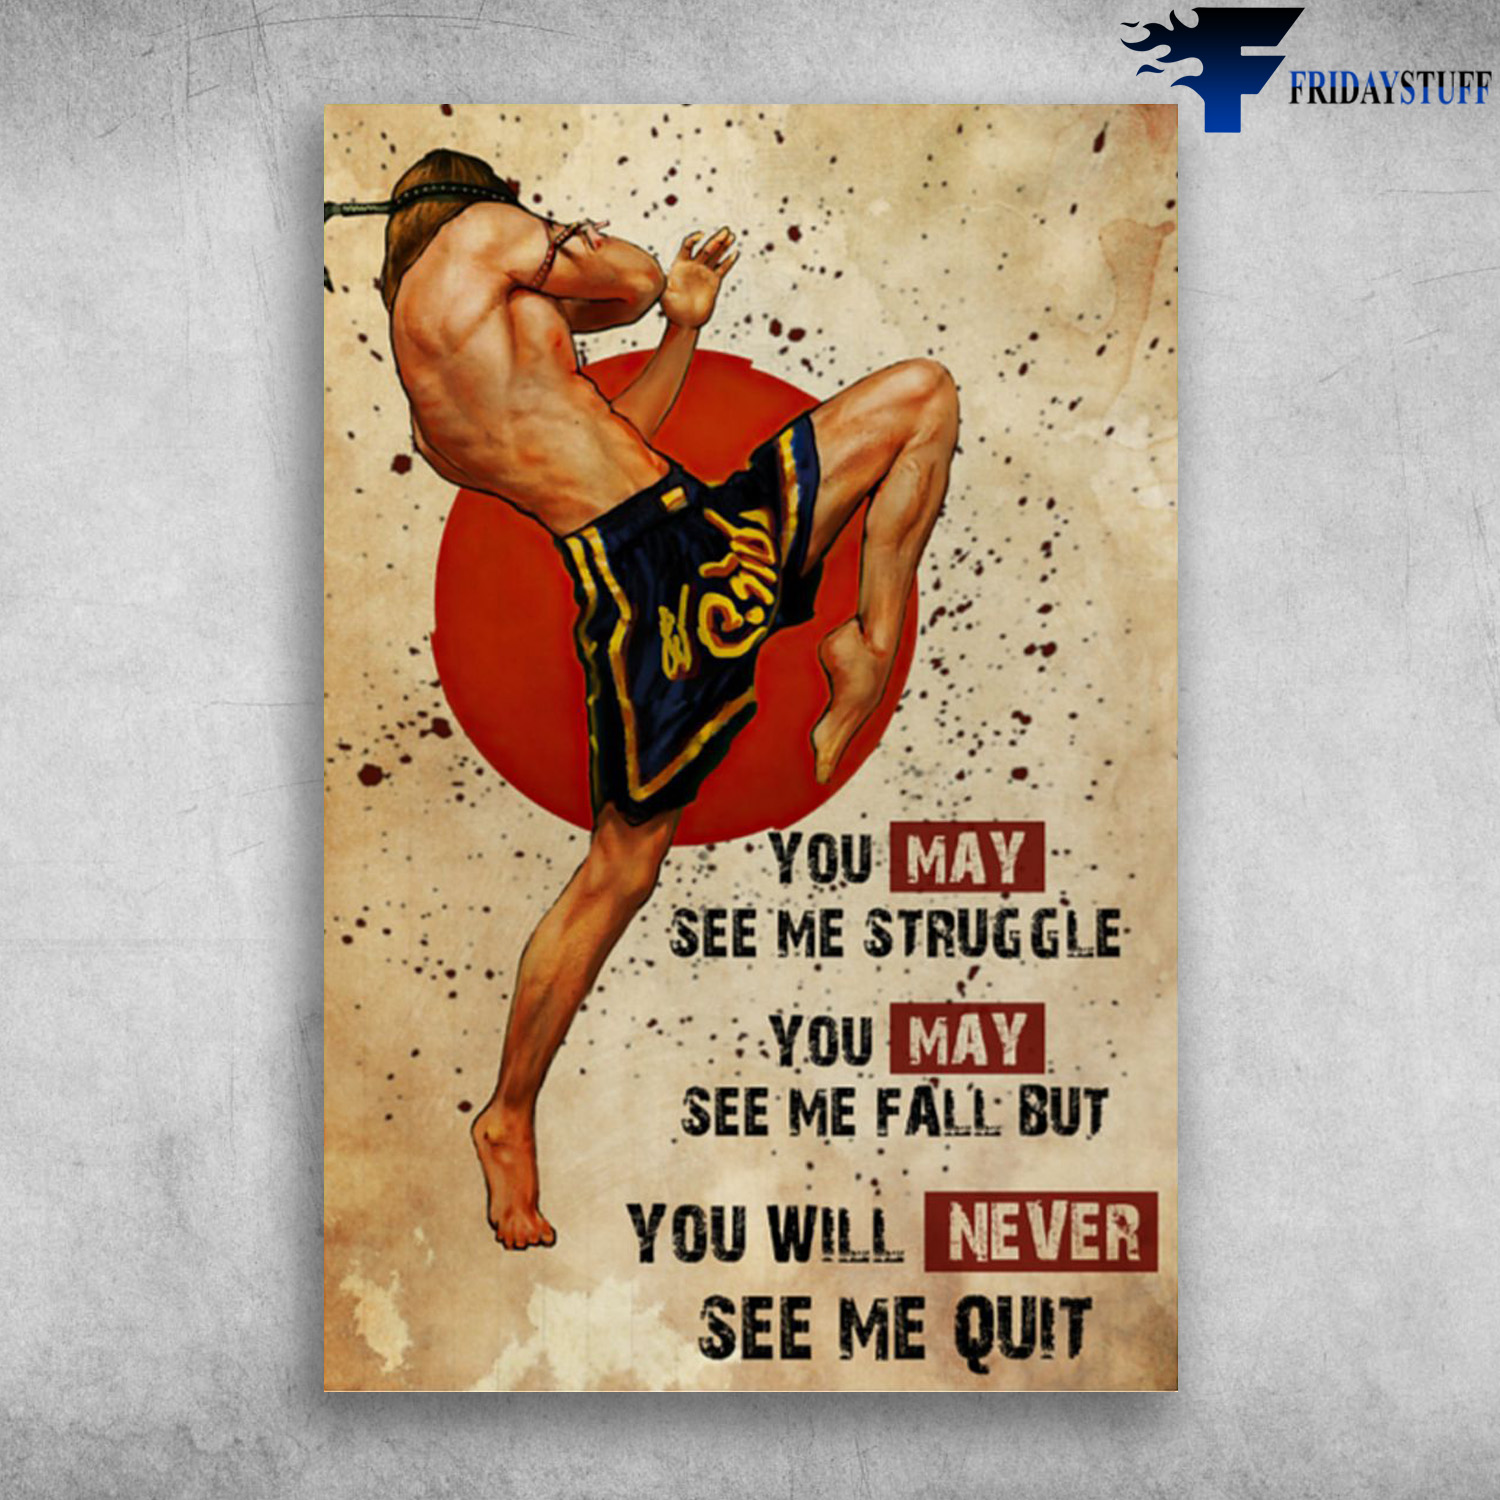 Muay Thai - You May See Me Struggle, You May See Me Fall But, You Will Never See Me Quit